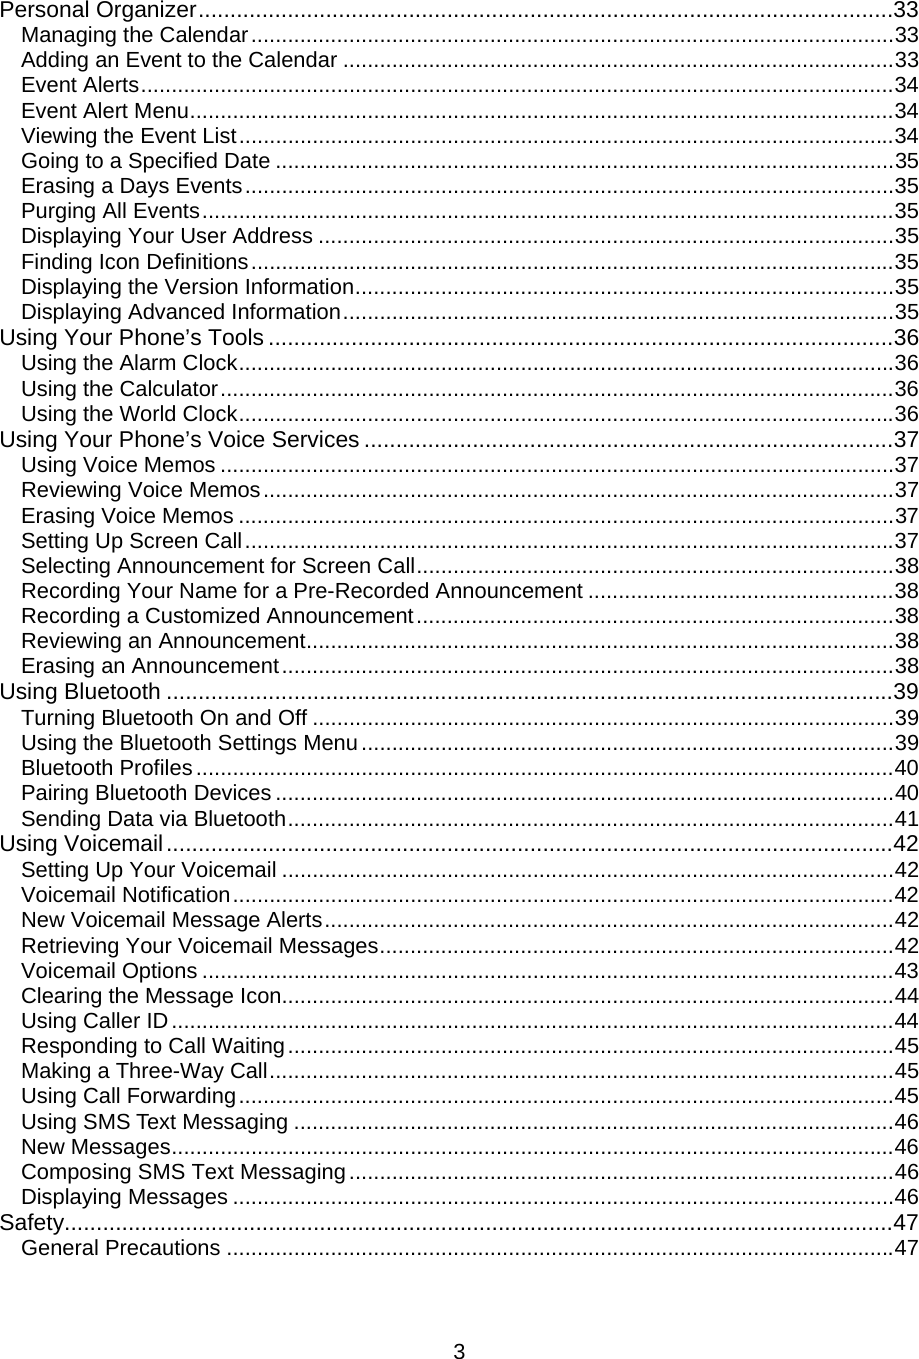 Personal Organizer.............................................................................................................33 Managing the Calendar.........................................................................................................33 Adding an Event to the Calendar ..........................................................................................33 Event Alerts...........................................................................................................................34 Event Alert Menu...................................................................................................................34 Viewing the Event List...........................................................................................................34 Going to a Specified Date .....................................................................................................35 Erasing a Days Events..........................................................................................................35 Purging All Events.................................................................................................................35 Displaying Your User Address ..............................................................................................35 Finding Icon Definitions.........................................................................................................35 Displaying the Version Information........................................................................................35 Displaying Advanced Information..........................................................................................35 Using Your Phone’s Tools ..................................................................................................36 Using the Alarm Clock...........................................................................................................36 Using the Calculator..............................................................................................................36 Using the World Clock...........................................................................................................36 Using Your Phone’s Voice Services ...................................................................................37 Using Voice Memos ..............................................................................................................37 Reviewing Voice Memos.......................................................................................................37 Erasing Voice Memos ...........................................................................................................37 Setting Up Screen Call..........................................................................................................37 Selecting Announcement for Screen Call..............................................................................38 Recording Your Name for a Pre-Recorded Announcement ..................................................38 Recording a Customized Announcement..............................................................................38 Reviewing an Announcement................................................................................................38 Erasing an Announcement....................................................................................................38 Using Bluetooth ..................................................................................................................39 Turning Bluetooth On and Off ...............................................................................................39 Using the Bluetooth Settings Menu.......................................................................................39 Bluetooth Profiles..................................................................................................................40 Pairing Bluetooth Devices .....................................................................................................40 Sending Data via Bluetooth...................................................................................................41 Using Voicemail..................................................................................................................42 Setting Up Your Voicemail ....................................................................................................42 Voicemail Notification............................................................................................................42 New Voicemail Message Alerts.............................................................................................42 Retrieving Your Voicemail Messages....................................................................................42 Voicemail Options .................................................................................................................43 Clearing the Message Icon....................................................................................................44 Using Caller ID......................................................................................................................44 Responding to Call Waiting...................................................................................................45 Making a Three-Way Call......................................................................................................45 Using Call Forwarding...........................................................................................................45 Using SMS Text Messaging ..................................................................................................46 New Messages......................................................................................................................46 Composing SMS Text Messaging.........................................................................................46 Displaying Messages ............................................................................................................46 Safety..................................................................................................................................47 General Precautions .............................................................................................................47  3